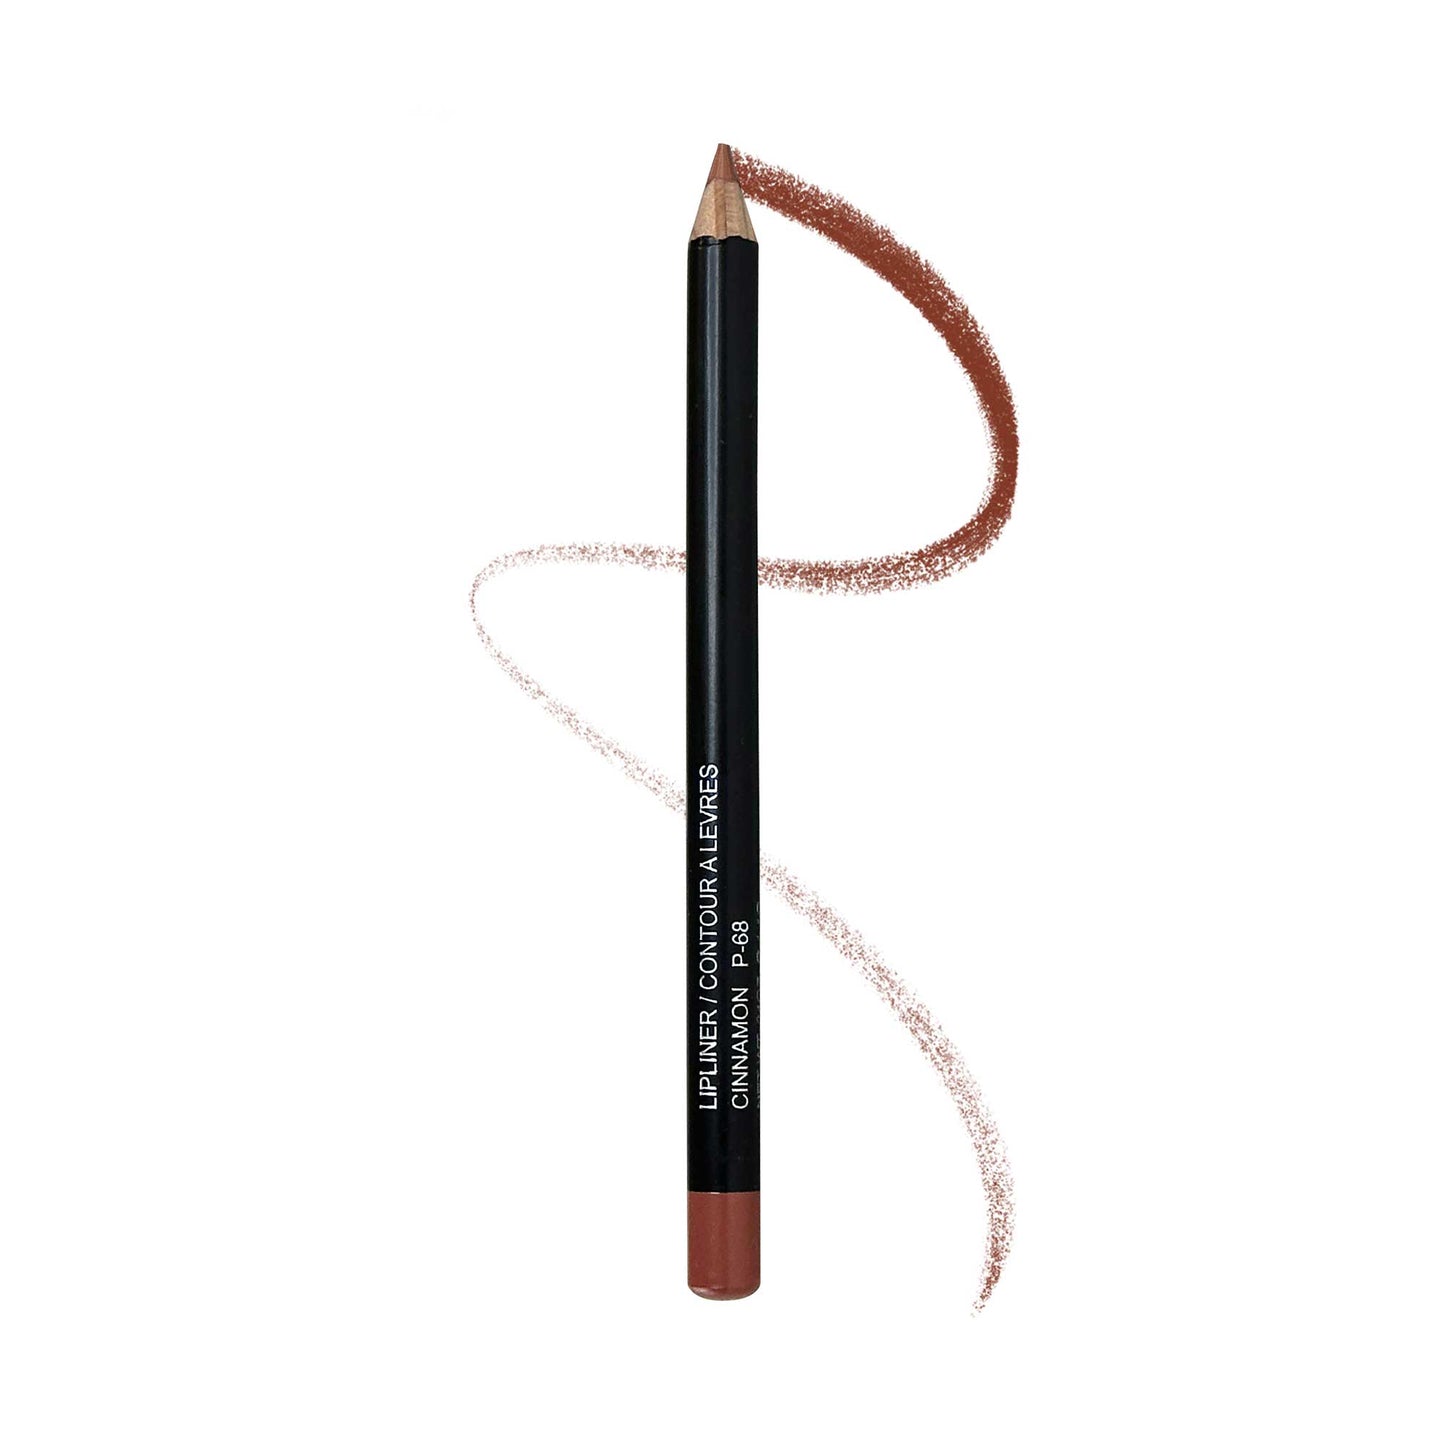 Cinnamon Lip Liner from Cruisin Organics packs a punch with its infusion of elitist seed oils. Plus, our long-lasting formula will have you smirking in delight all day long. And for the men who fancy themselves as elite judges of a woman's beauty, they'll surely be impressed by the enhanced smile and plumper pout our liner provides. Complete with our dreamy Pillow Talk shade, this pairing is a must-have for any lip lover.